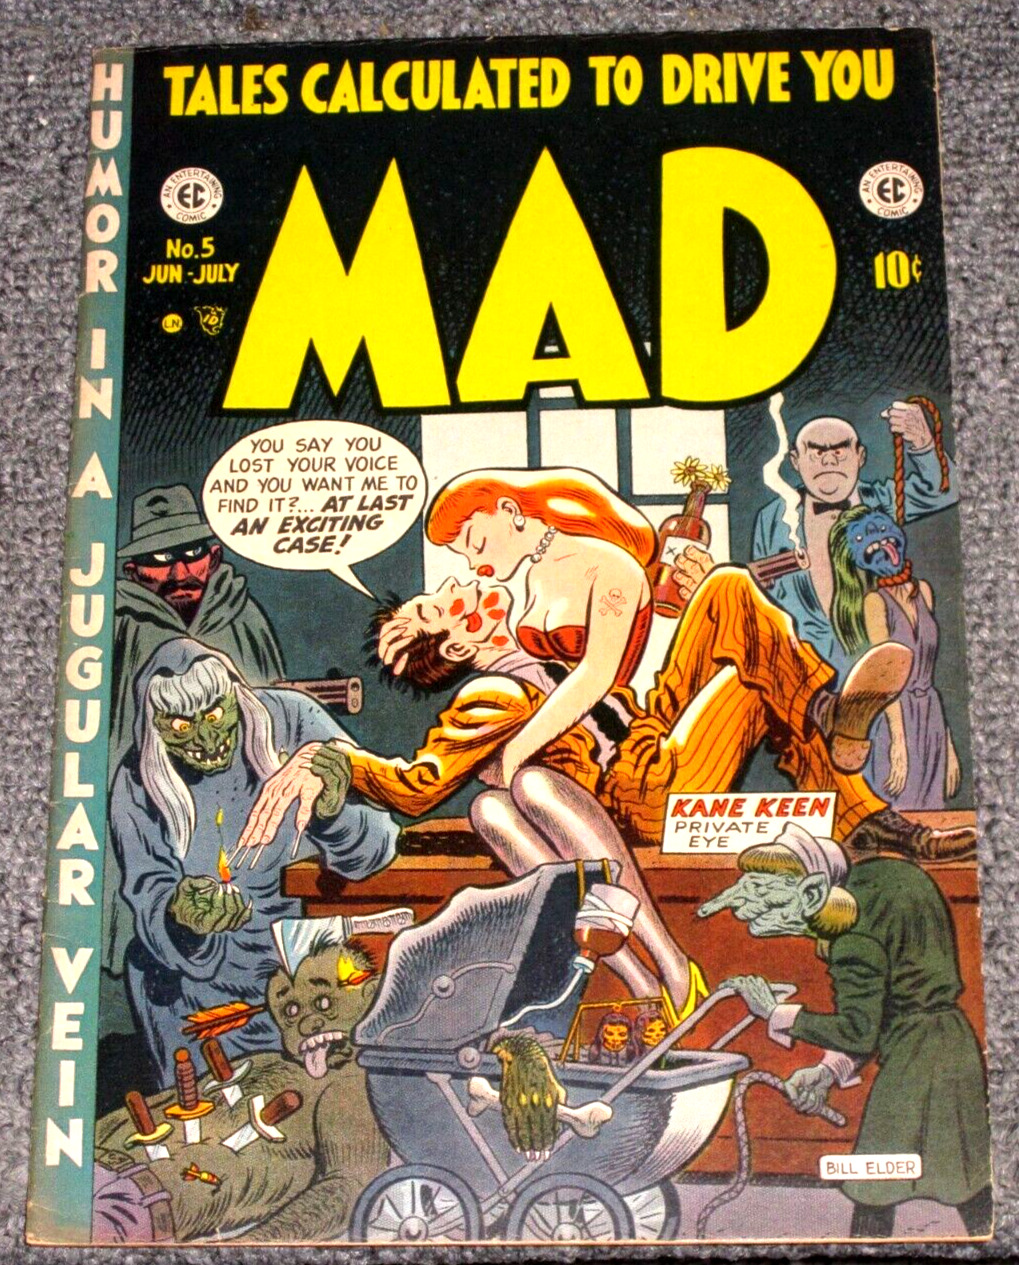 MAD NO. 5 EC JUNE-JULY 1953 CLASSIC RARE HORROR COVER CLEAN INNER FRONT & BACK